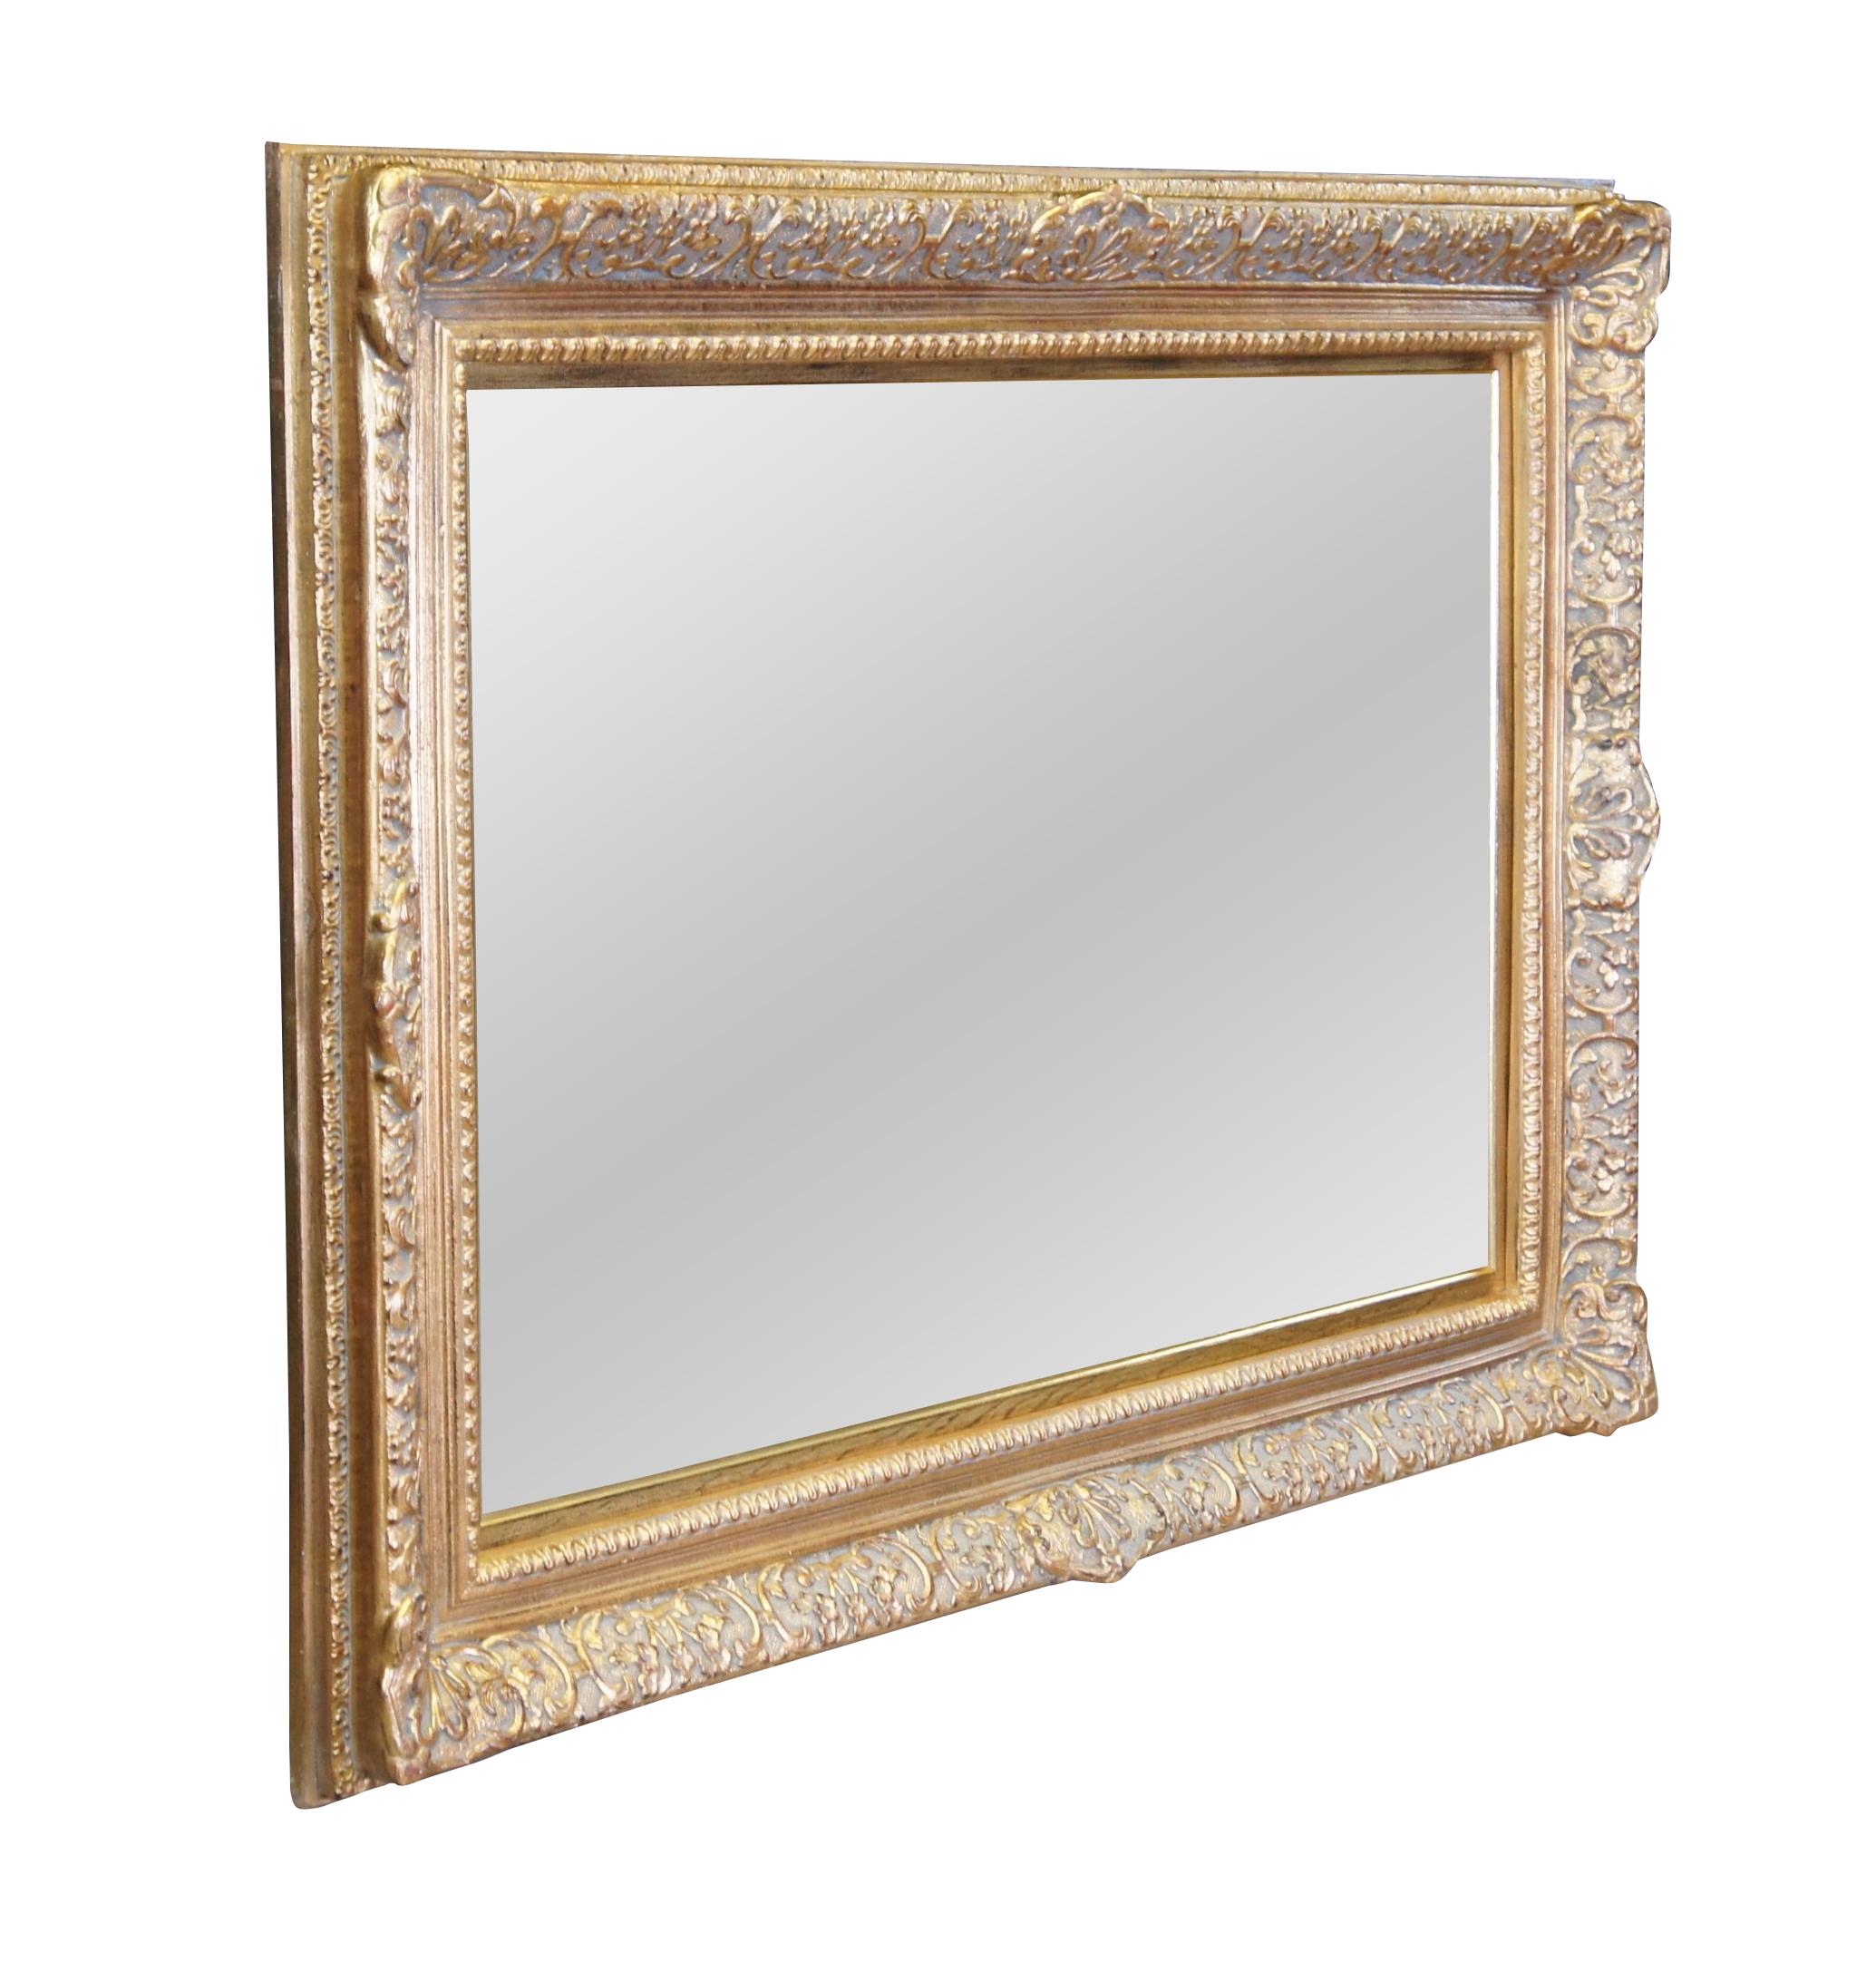 An Italian Baroque style mirror.  Features an ornate gold frame made from pine and beveled glass plate mirror.  Can be hung vertical or horizontal.  Great for over a console, bathroom, bedroom or above a mantel.  Would also work well as a painting /